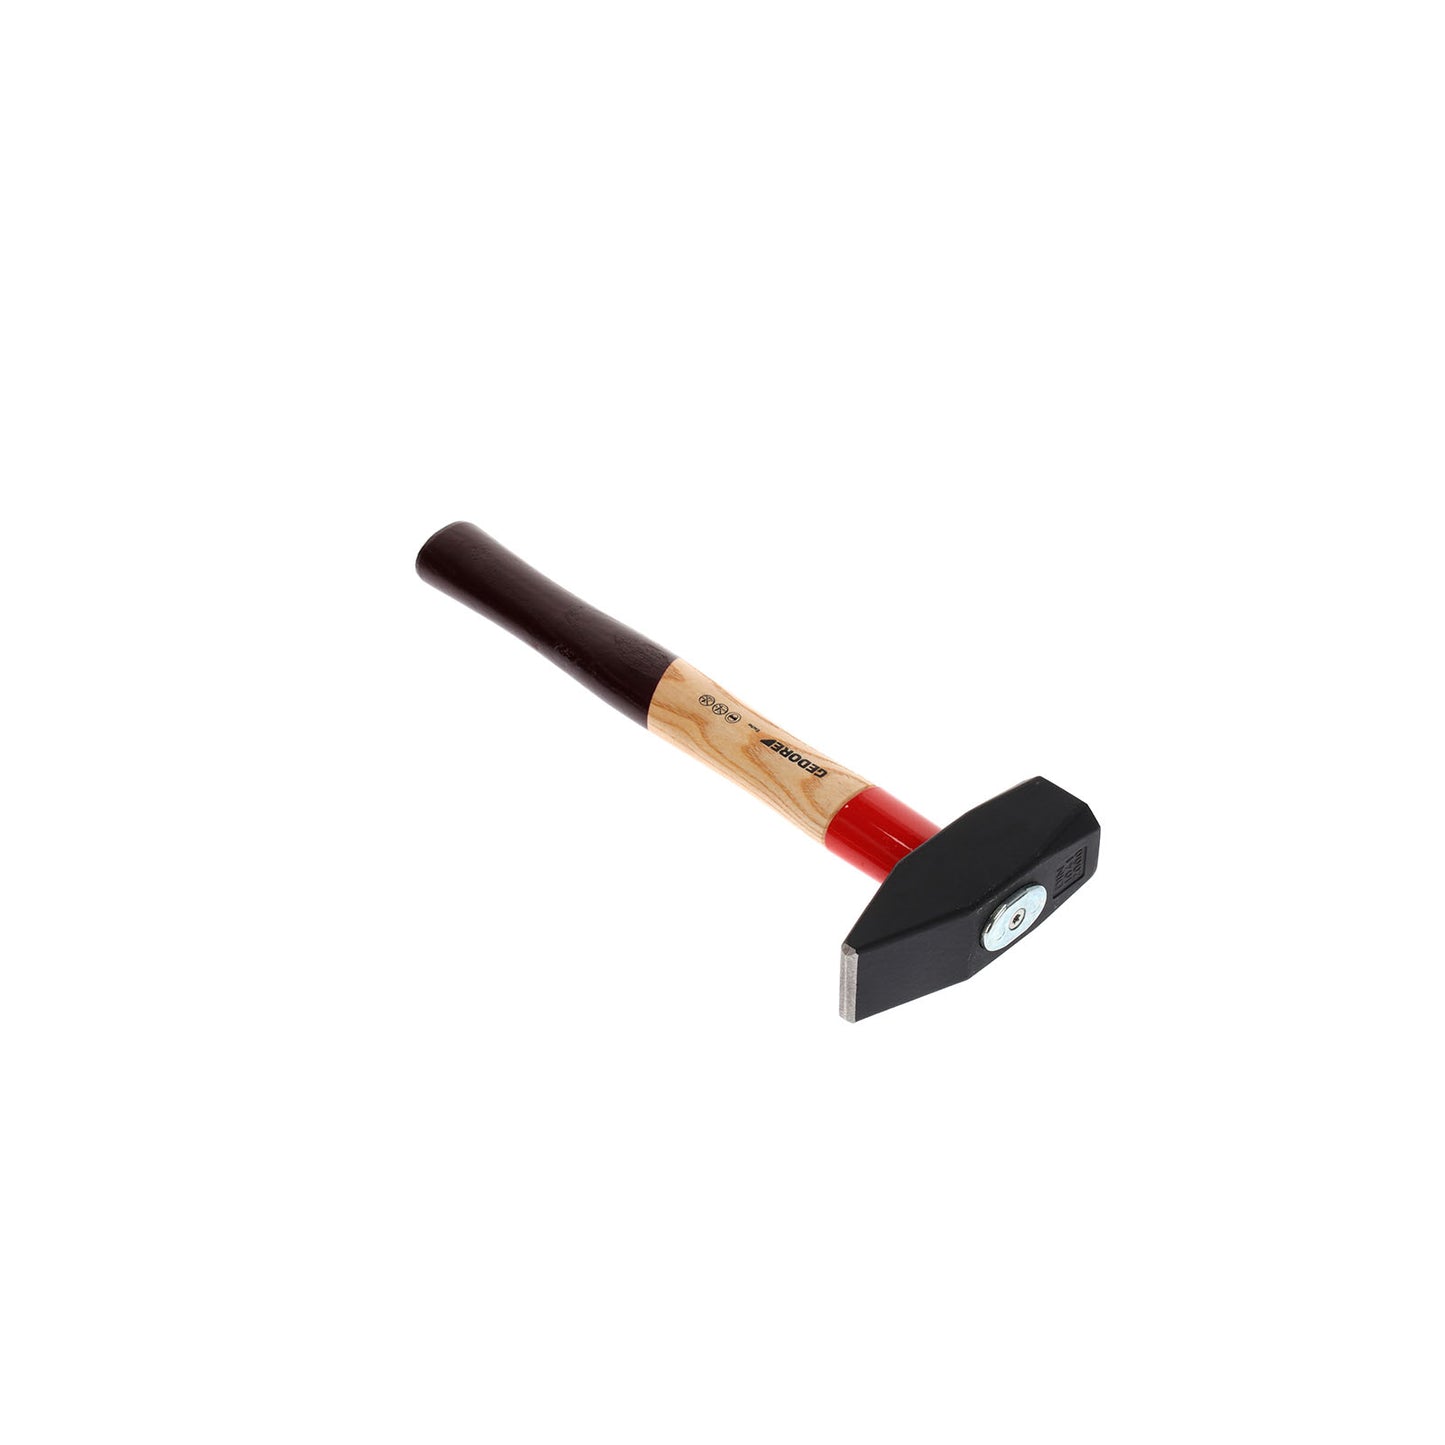 GEDORE 600 E-2000 - ROTBAND assembly hammer 2kg (8582770)